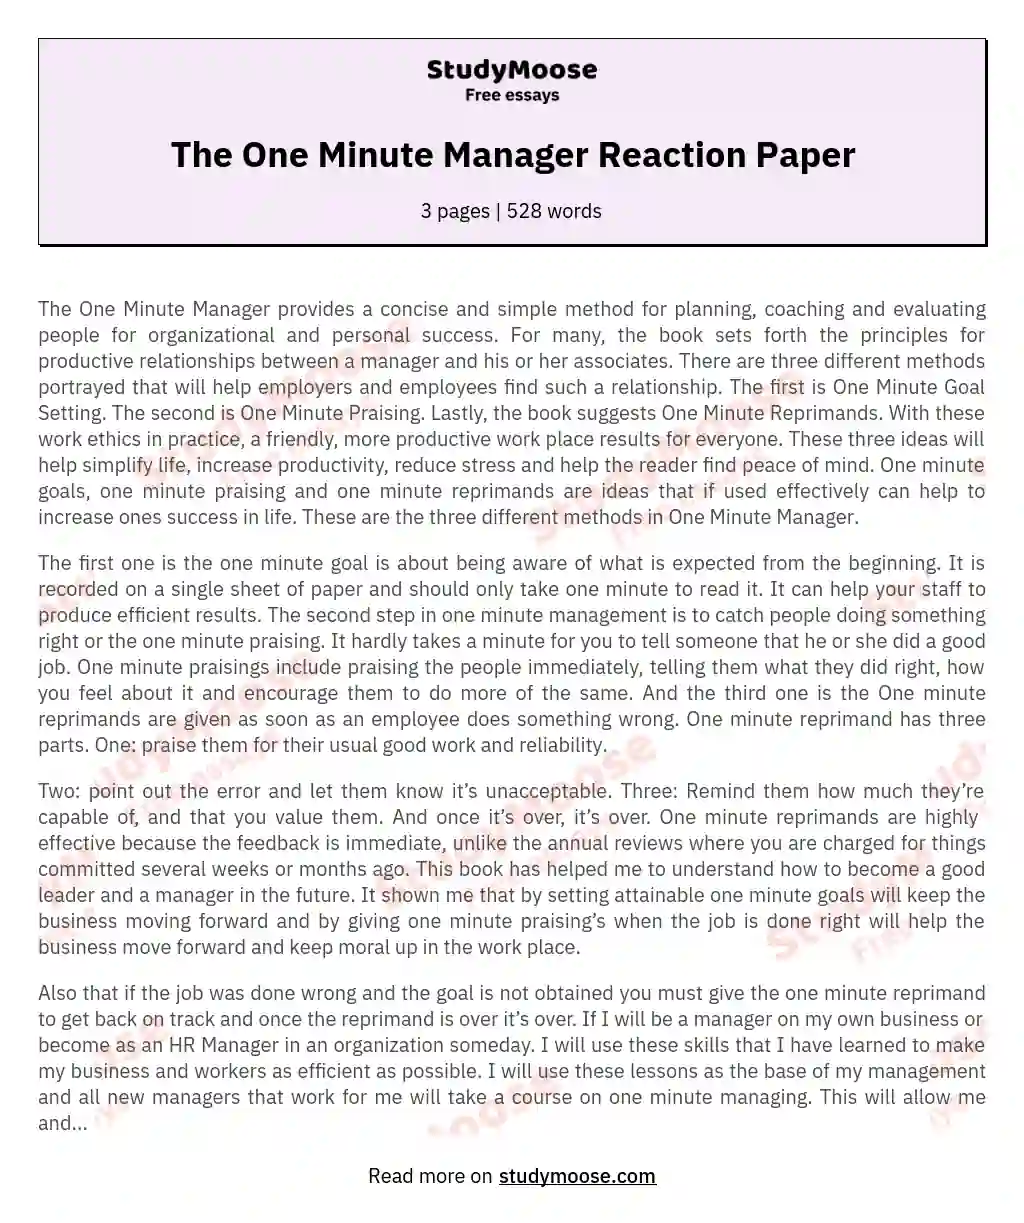 The One Minute Manager Reaction Paper essay